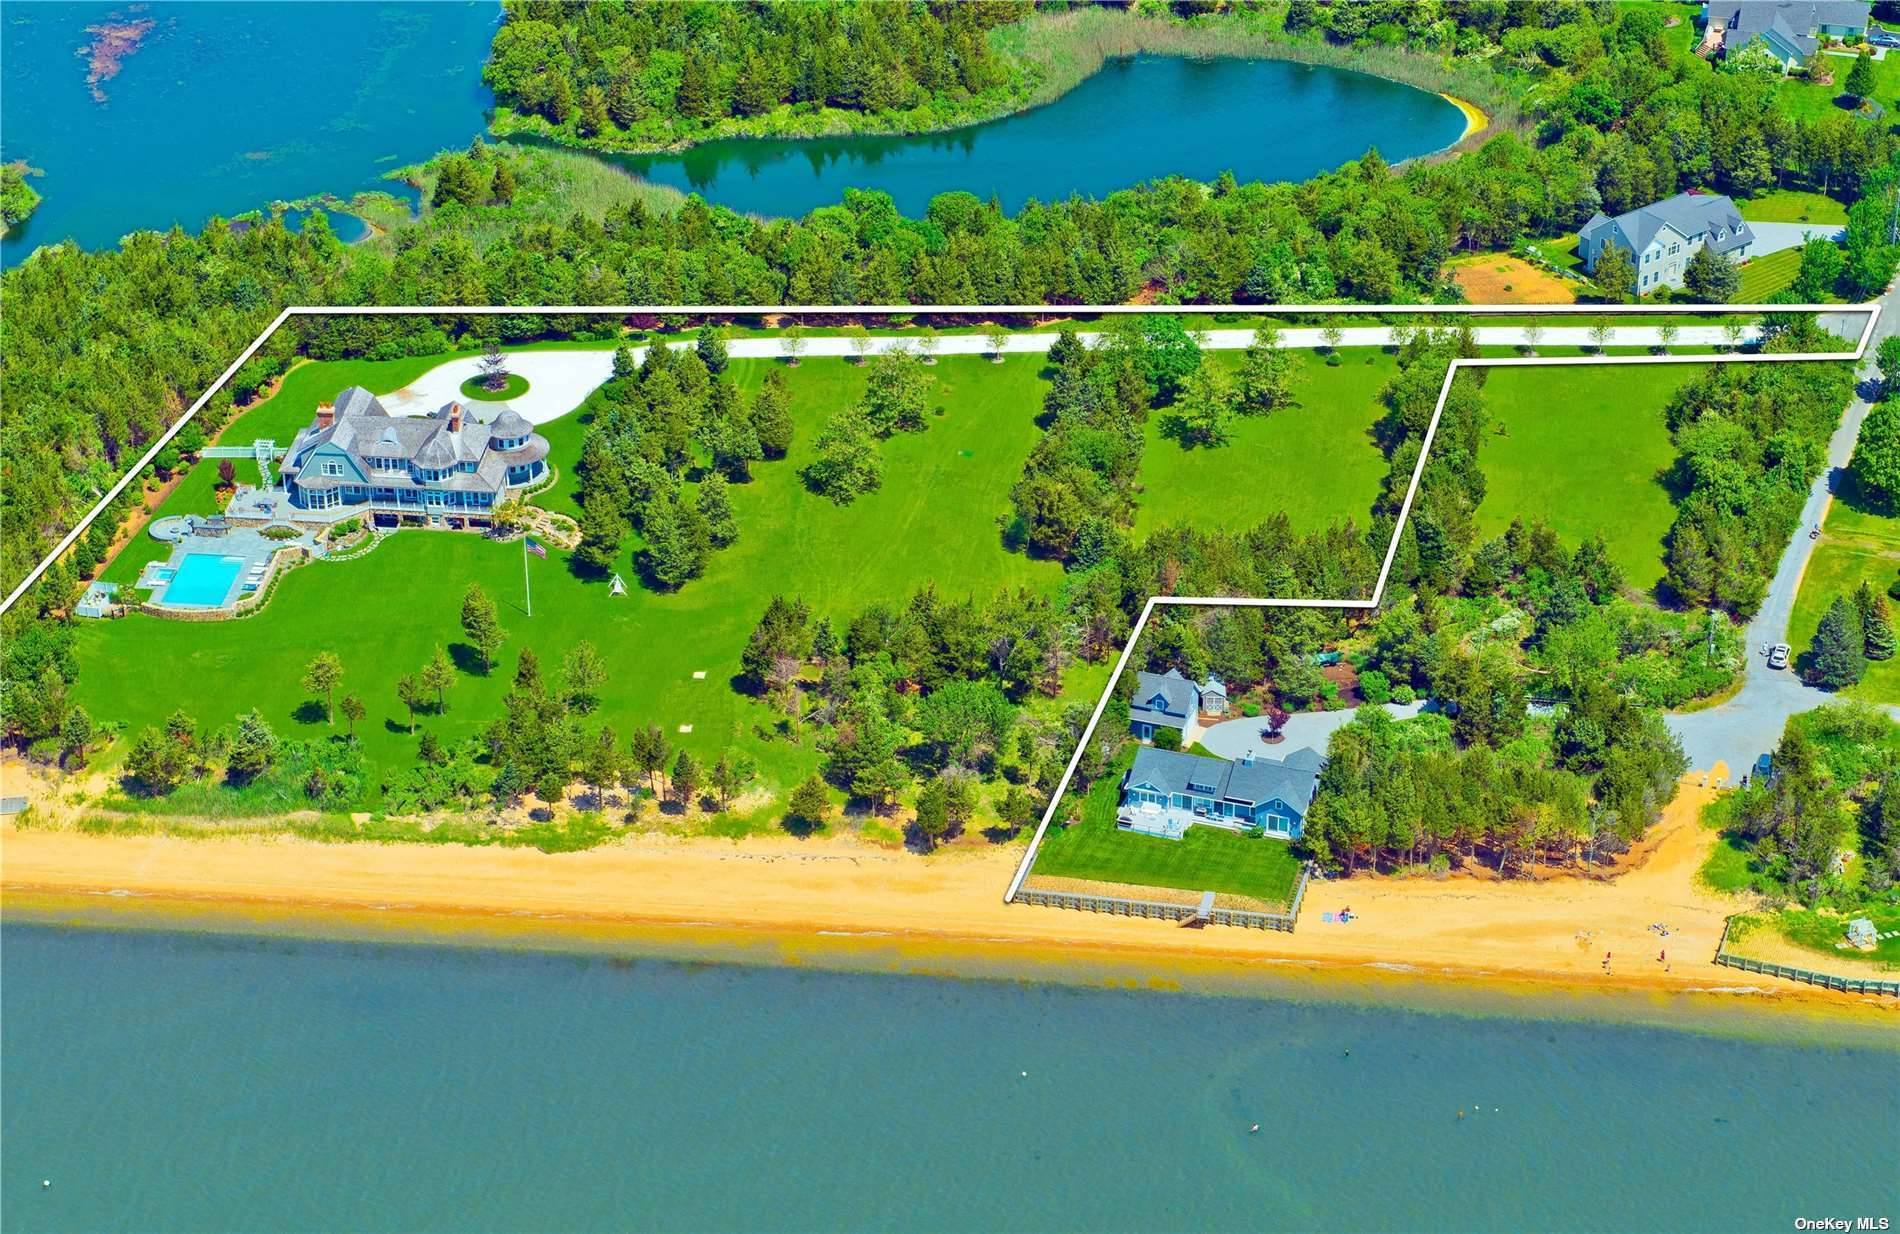 The Esplanade, A private estate surrounded by water amp ; preserved land comprised of 3 separate Bayfront lots totaling shy 5 acres amp ; 400' of sandy beach, fronting Peconic ...